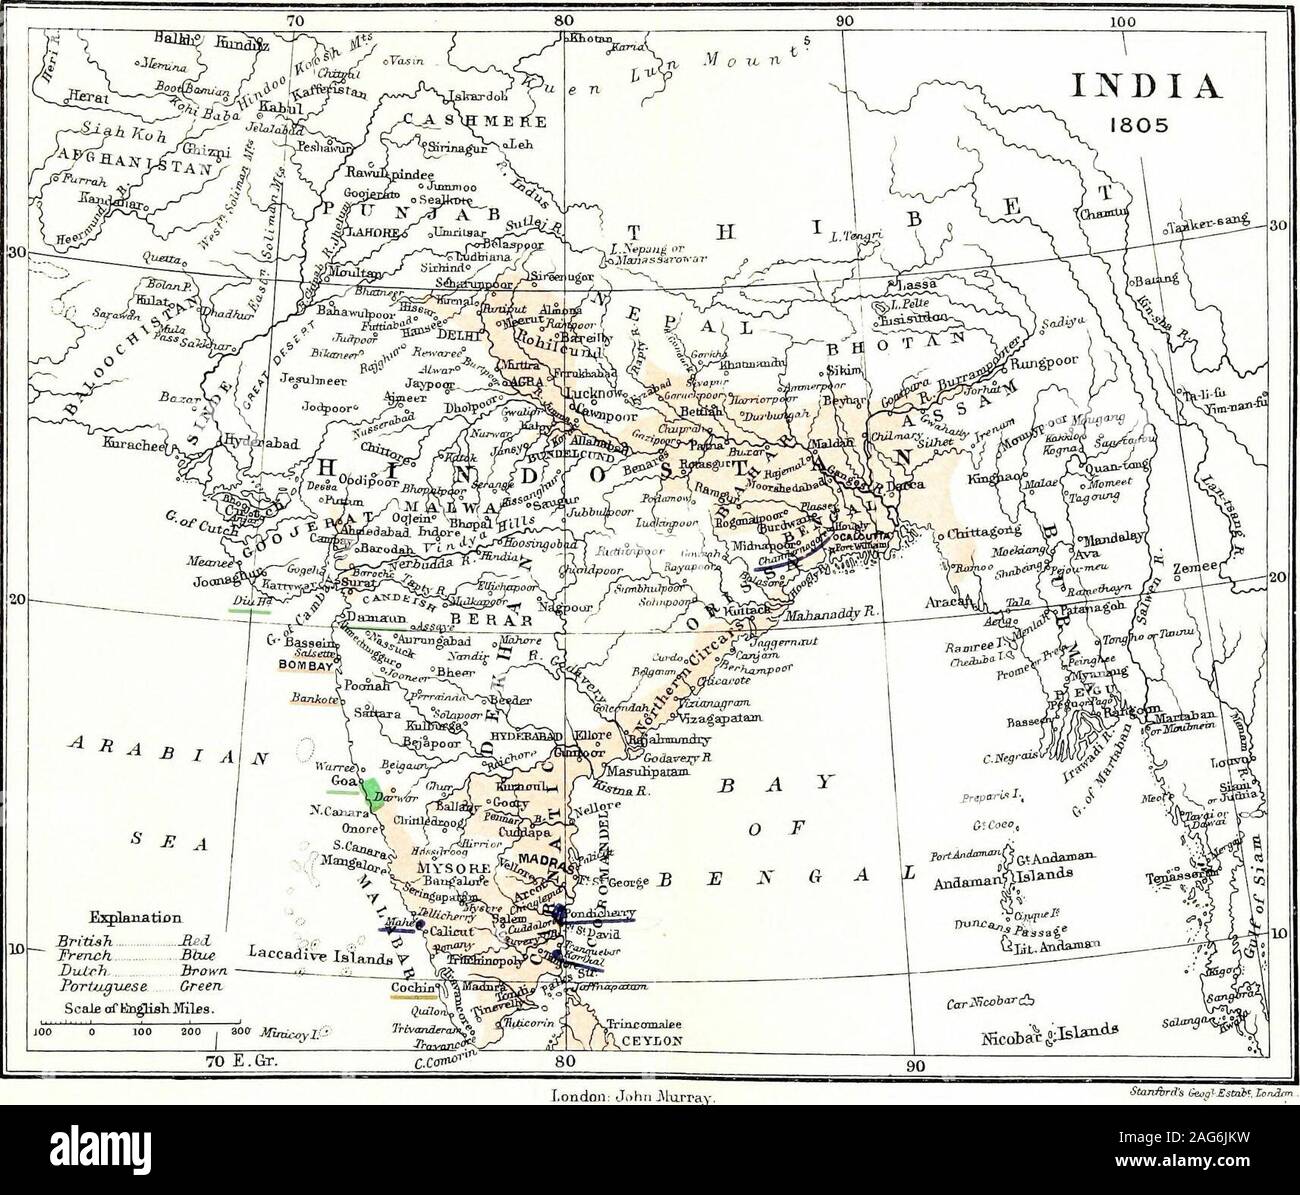 . The rise and expansion of the British dominion in India. of order the great provmces whichhad been recently acquired. The investigation of land-tenures, the institution of an elementary police, the firstserious attempts to check the brigandage prevailing inour districts, the arrangement and supervision of thelocal courts of justice, took substantial form at thebeginning of this century; the roots of that immensesystem of organized government which has since spreadover all India were planted at this season of compara-tive tranquillity. The first five years of the nineteenthcentury were occupi Stock Photo